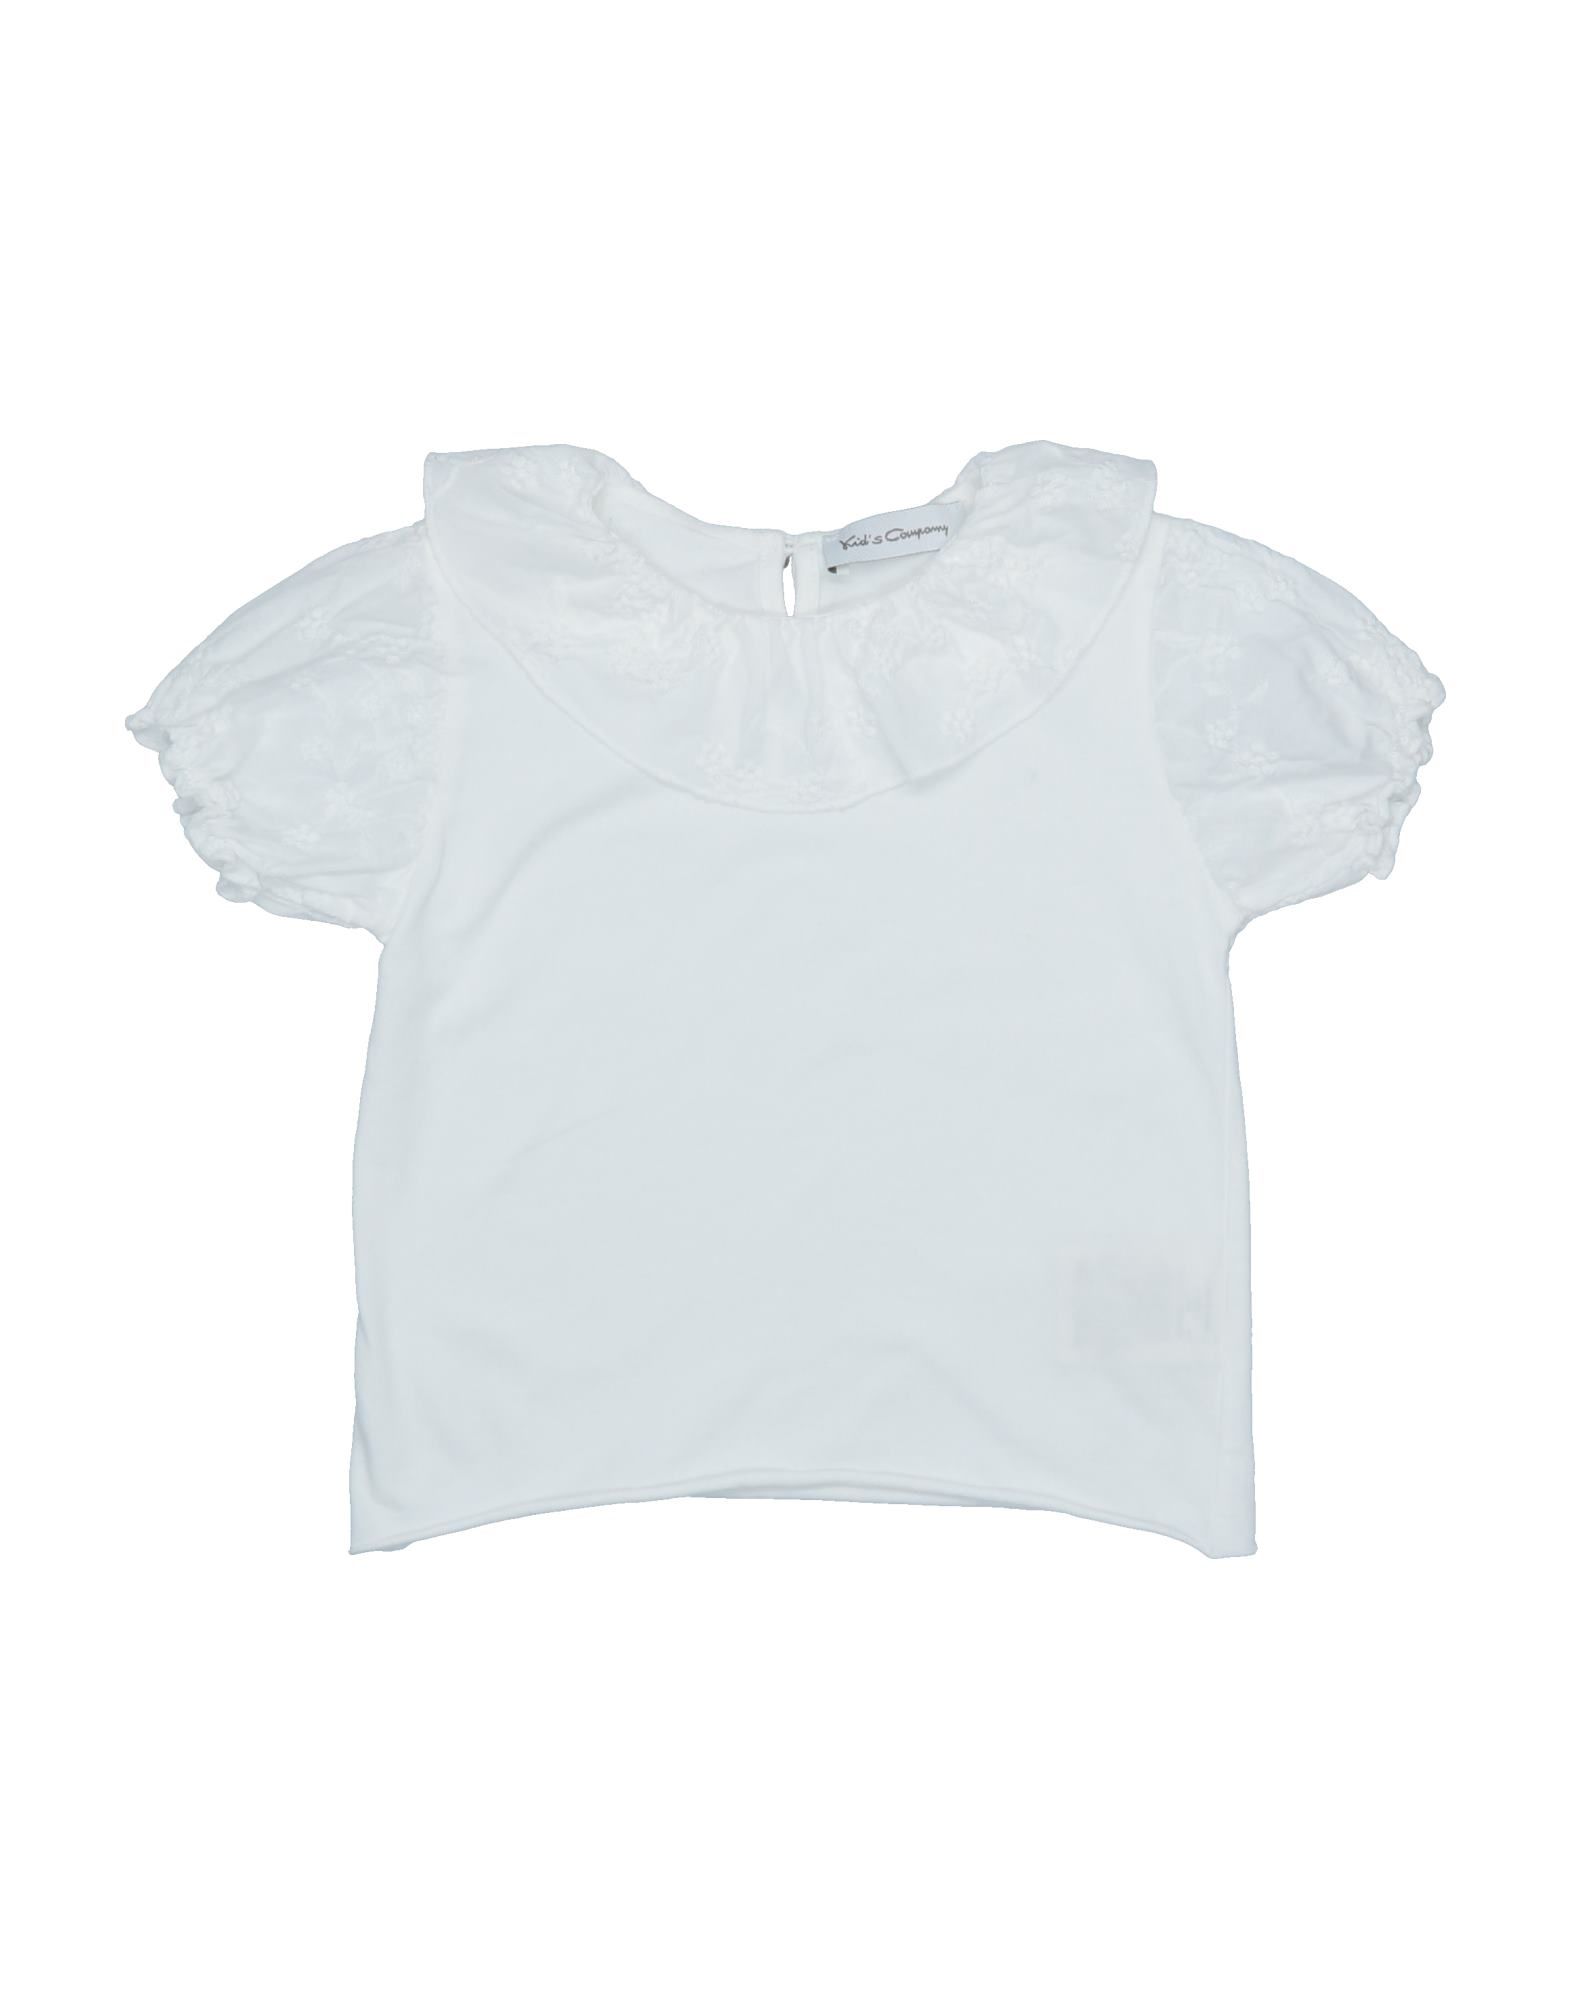 Kid's Company Kids' T-shirts In White